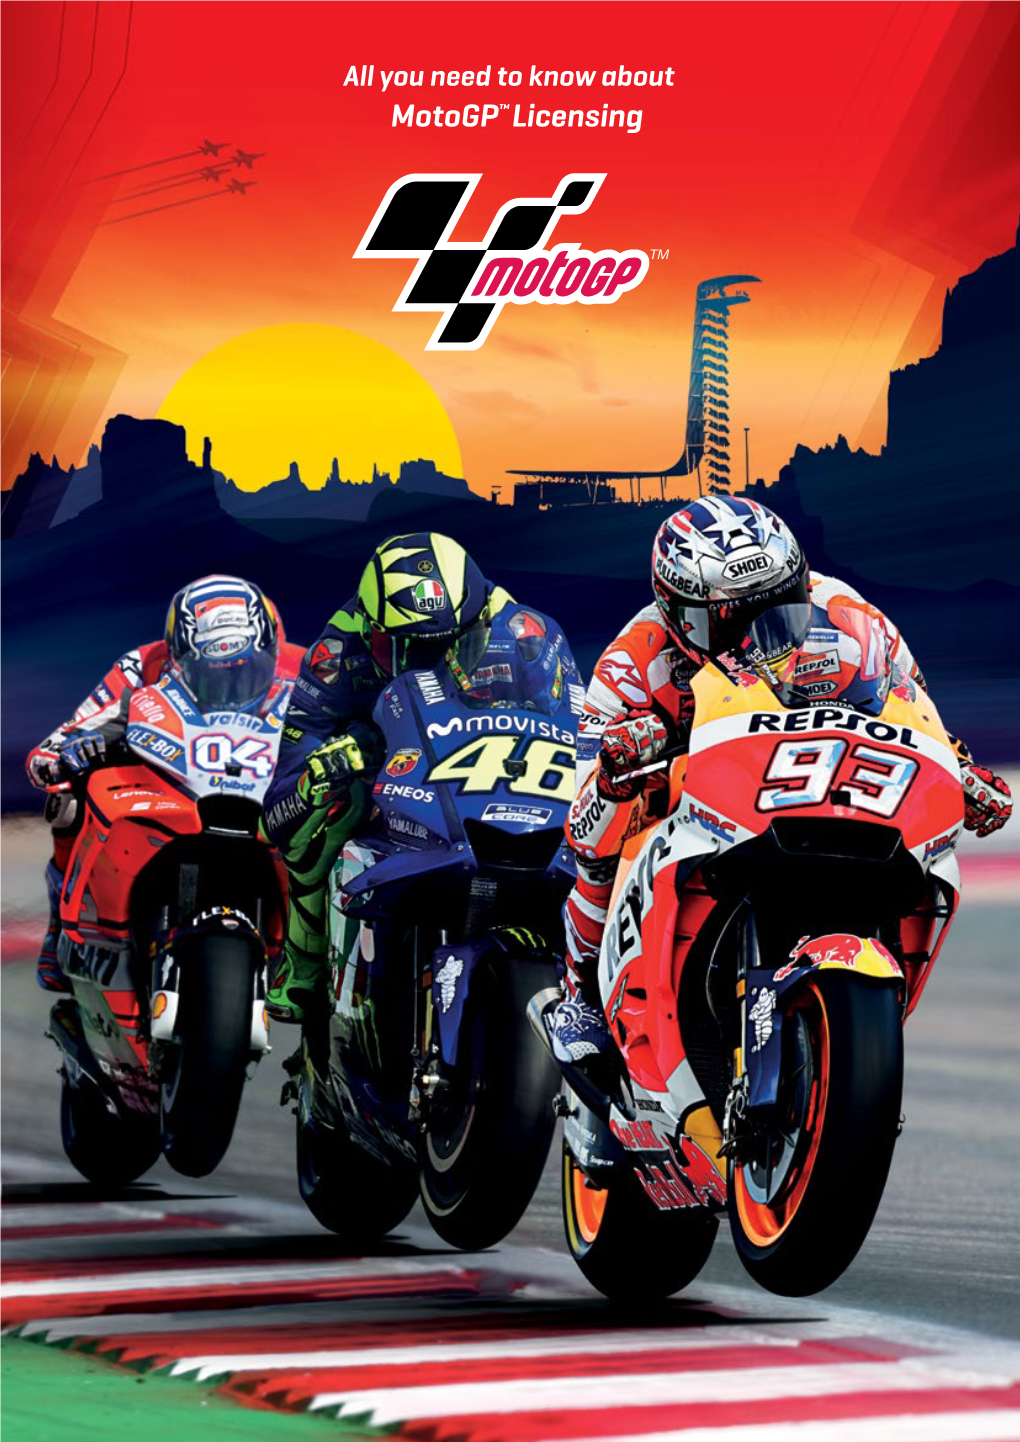 You Need to Know About Motogp™ Licensing